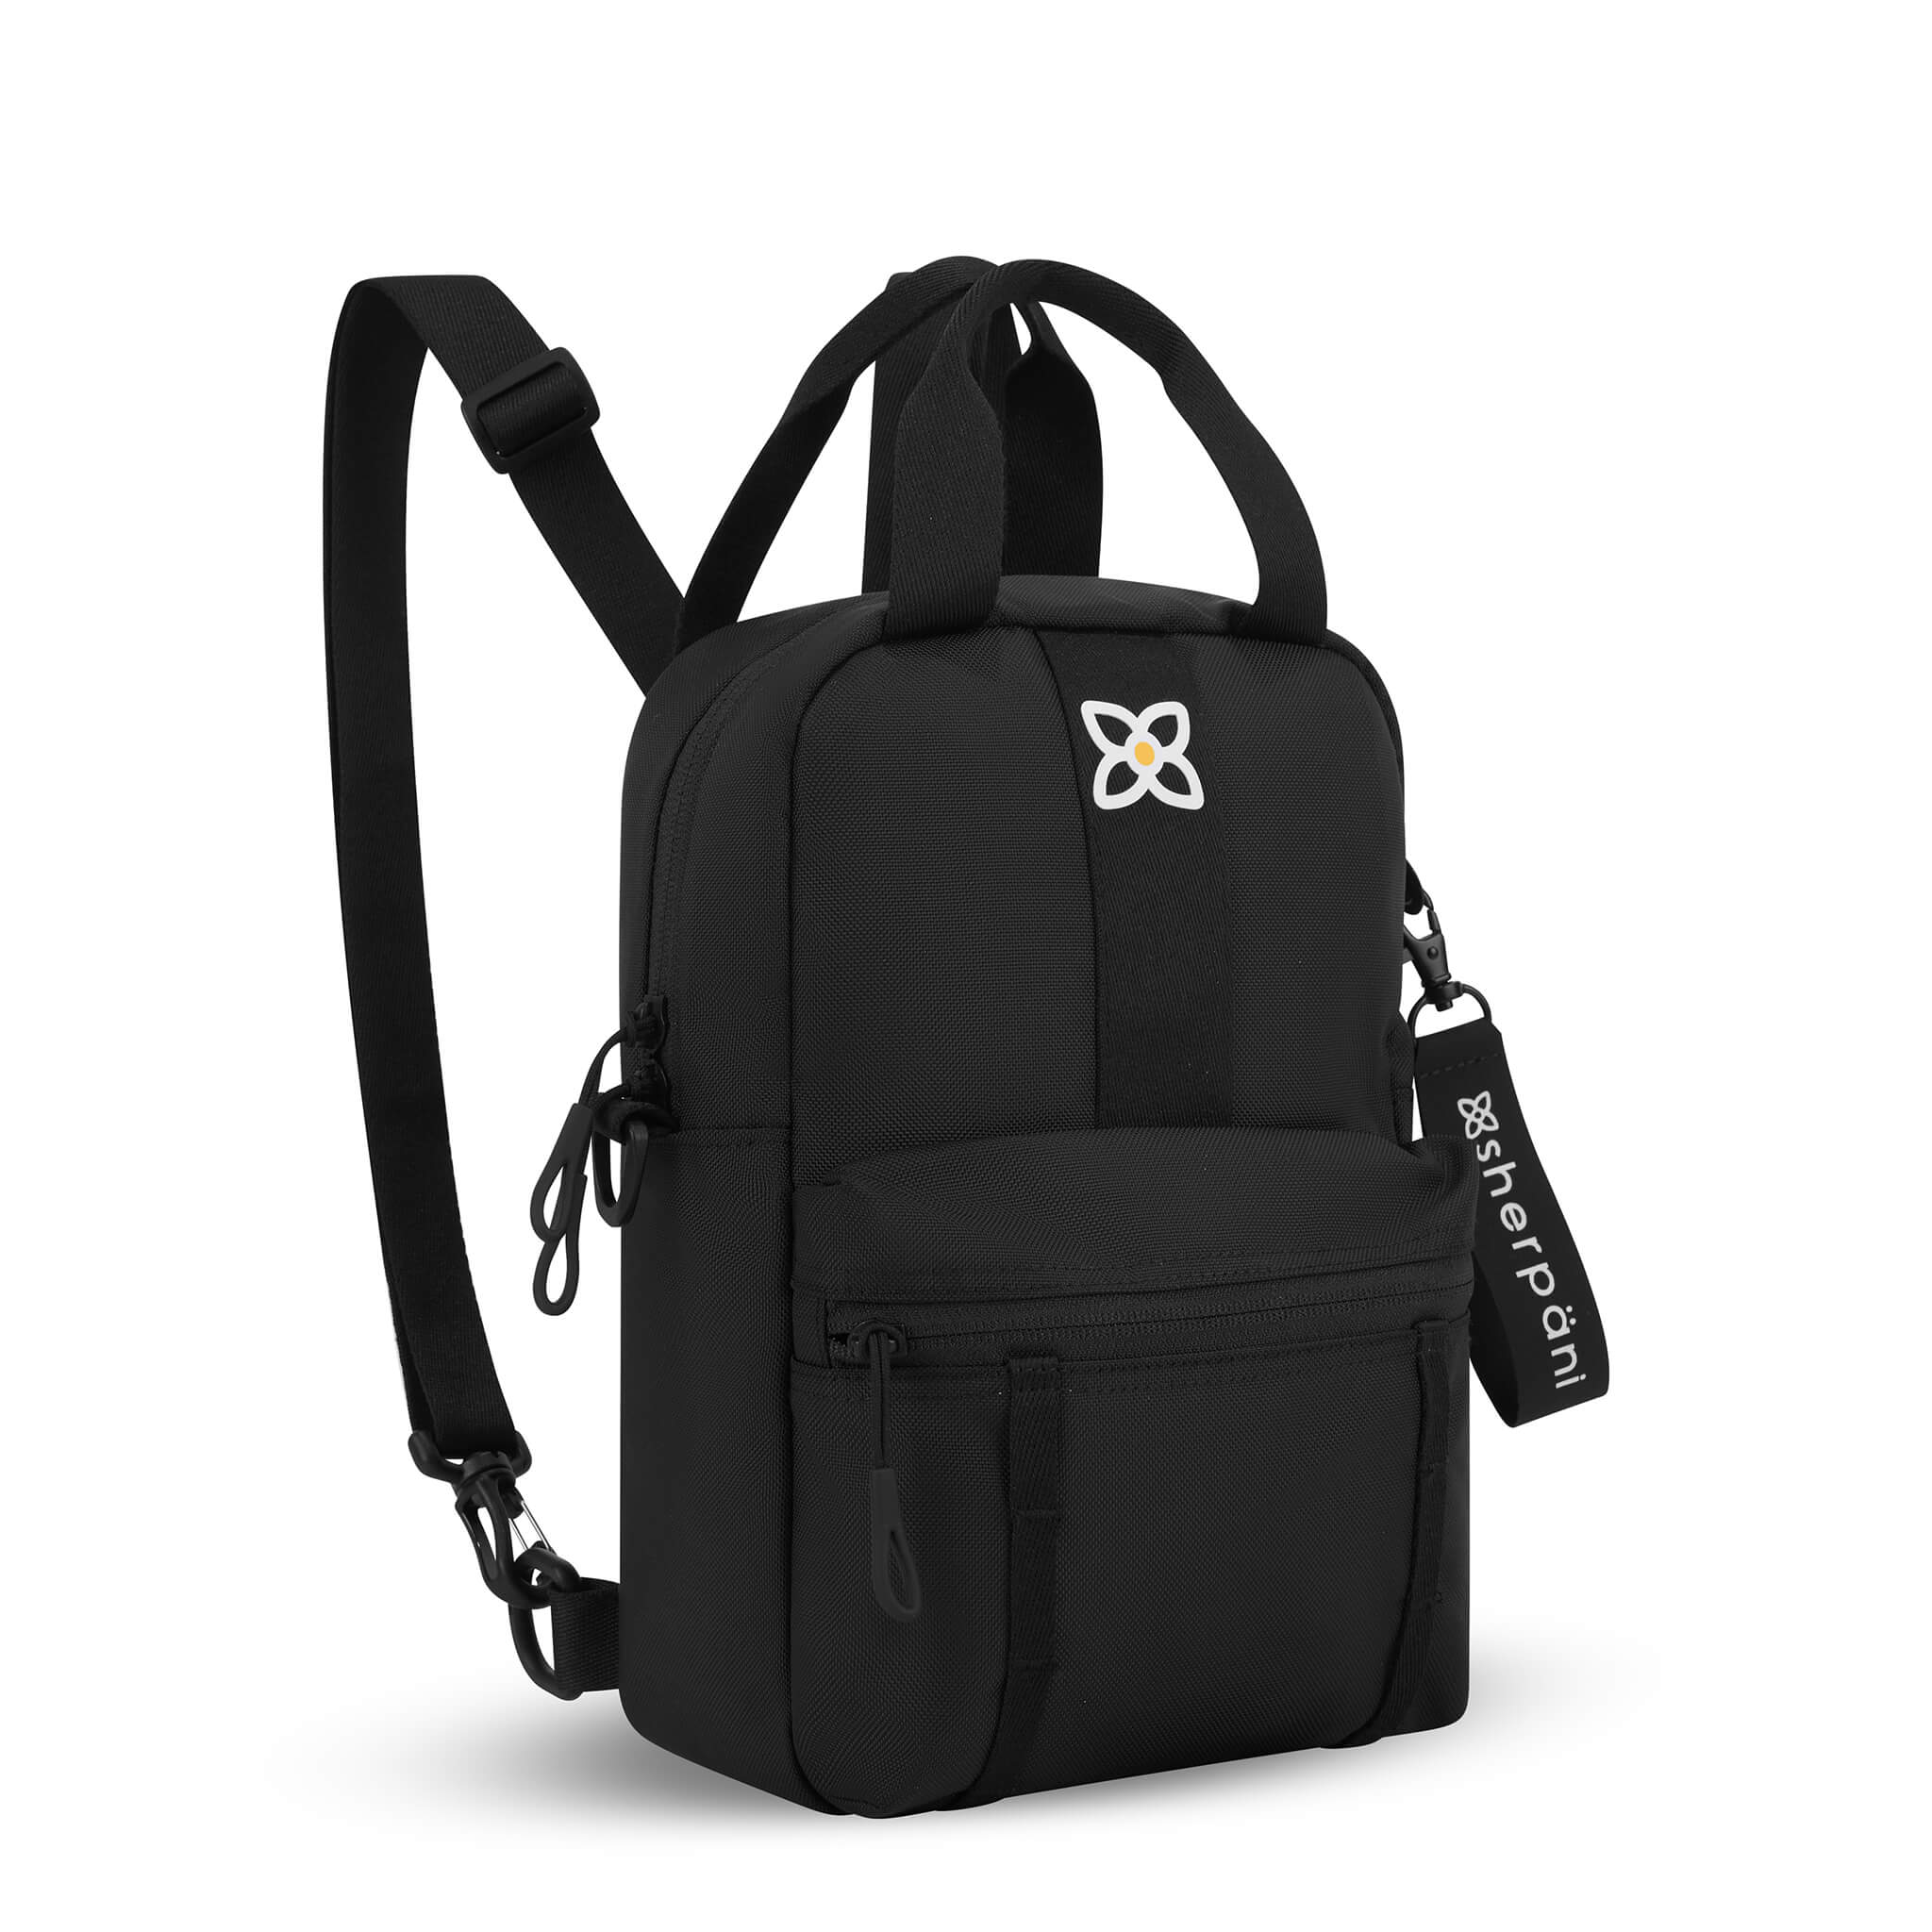 Angled front view of Sherpani mini backpack the Logan in Raven. The bag is black in color. The Logan has fixed tote handles and adjustable backpack straps.